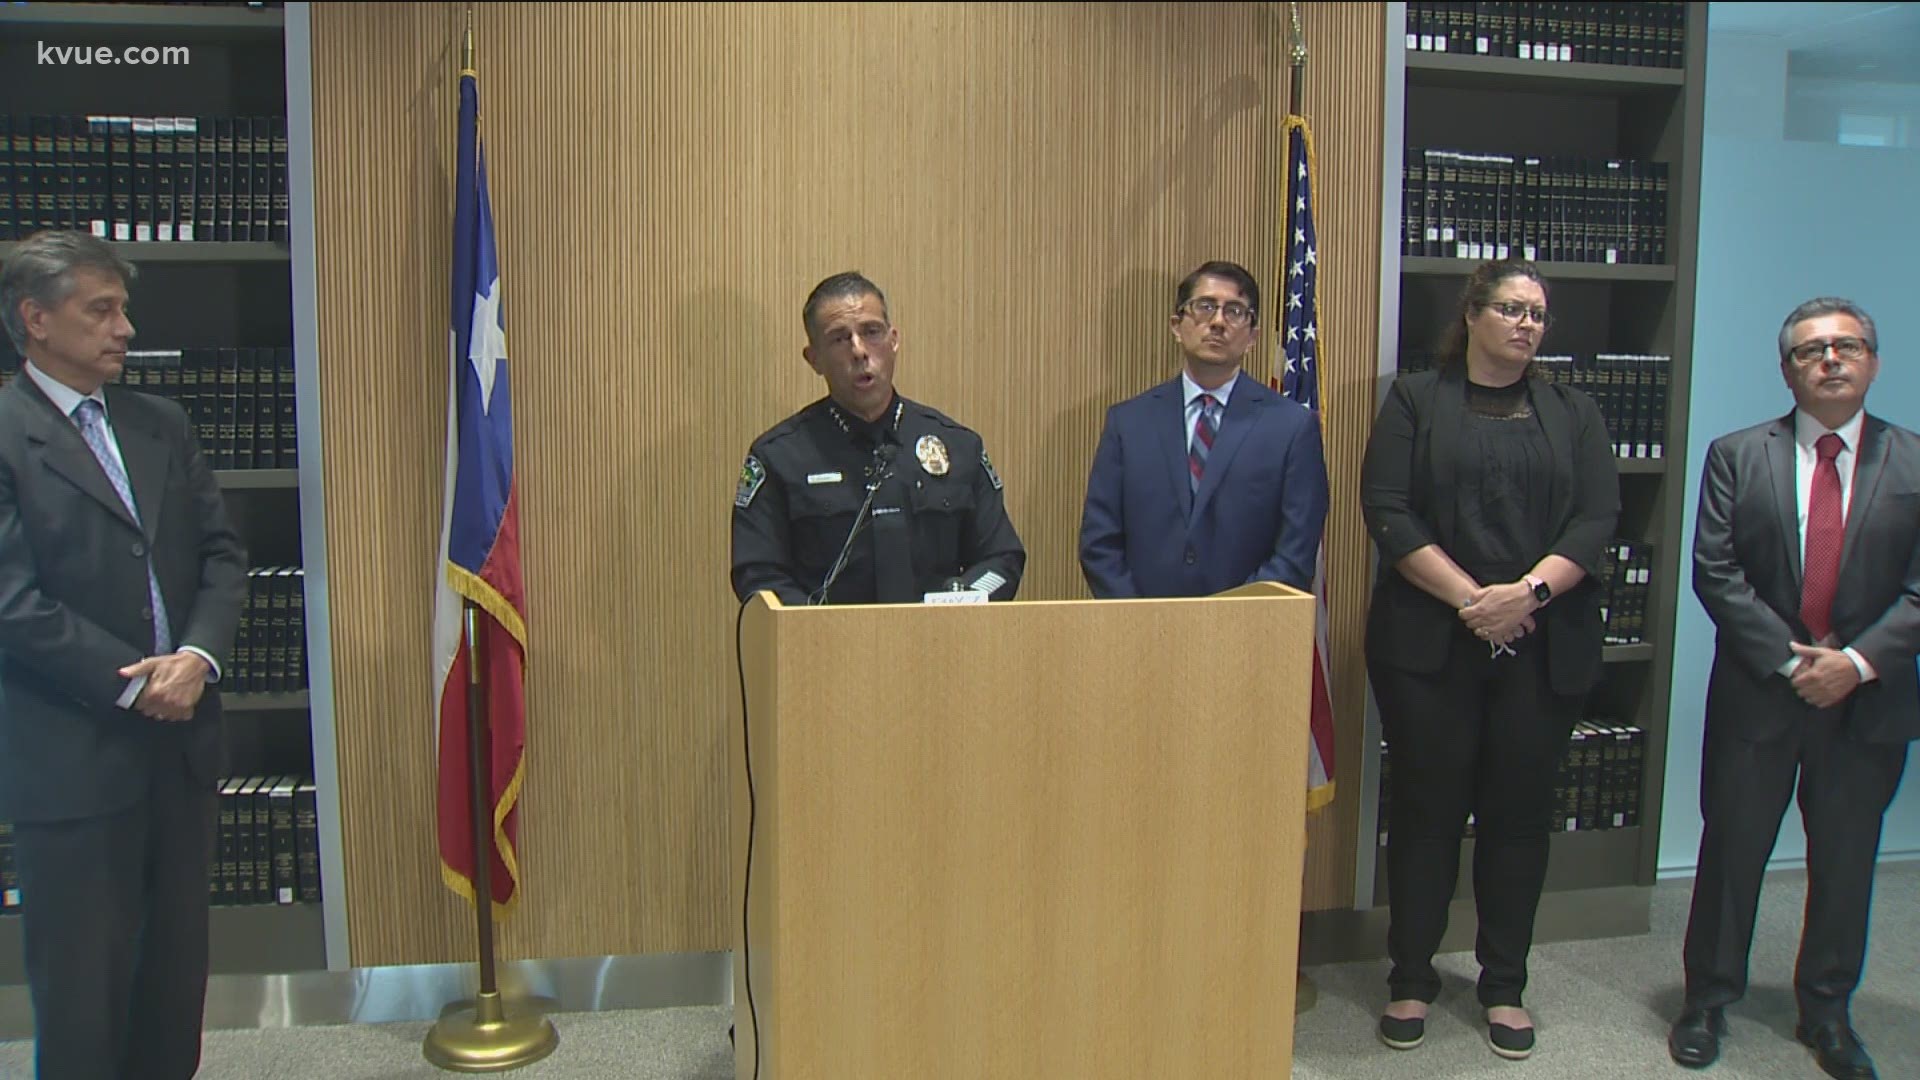 On Tuesday, Interim Chief Chacon said police now have a new suspect named De'ondre Jermirris White, who they believe to be the primary gunman in the shooting.